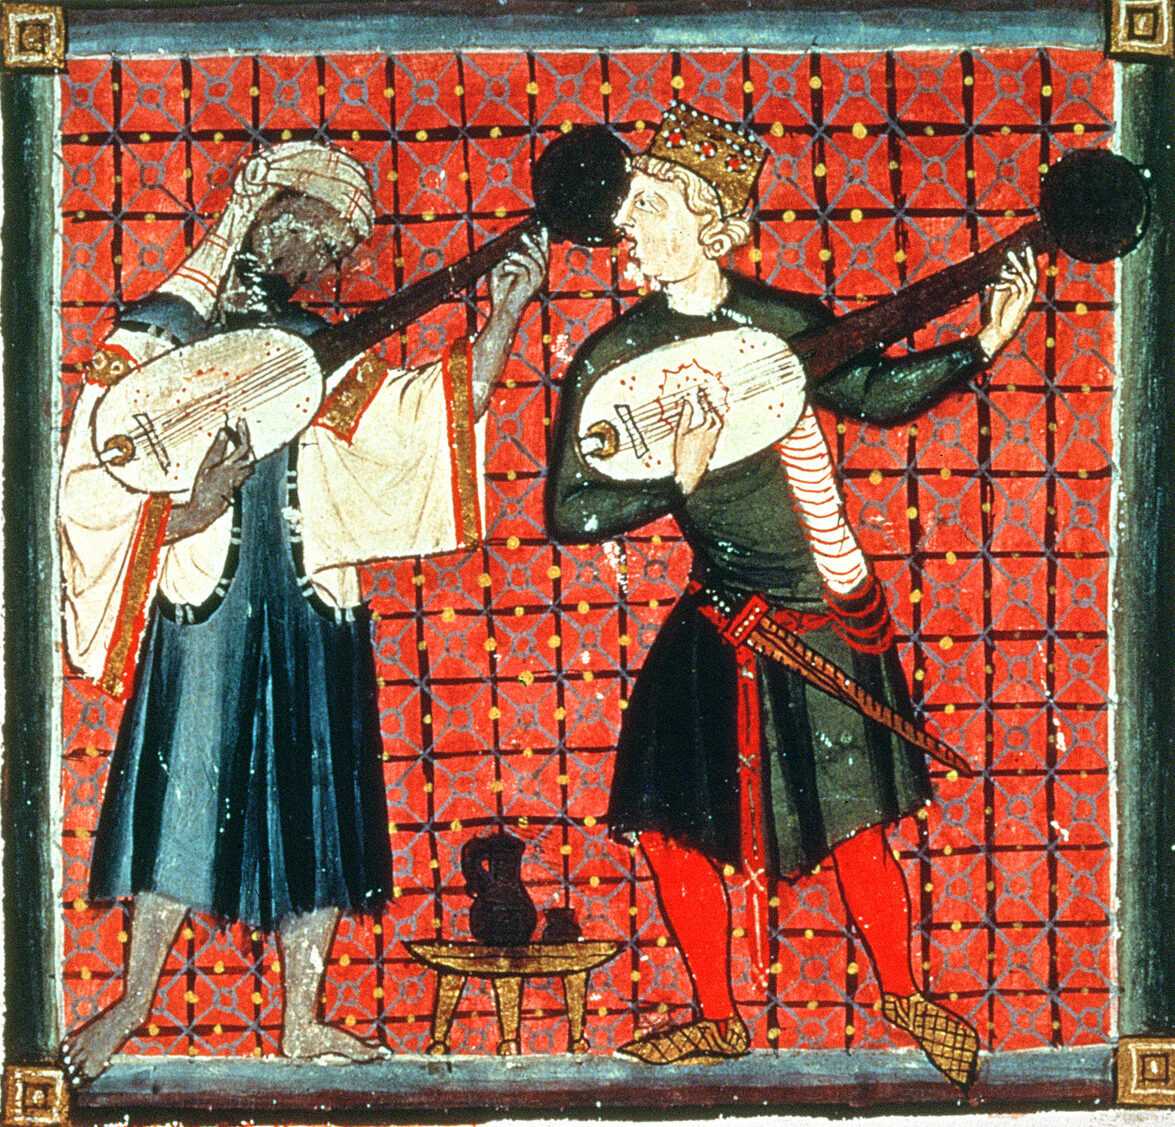 A colorful illustration of a muslim and christian musician playing a guitar like instrument together.